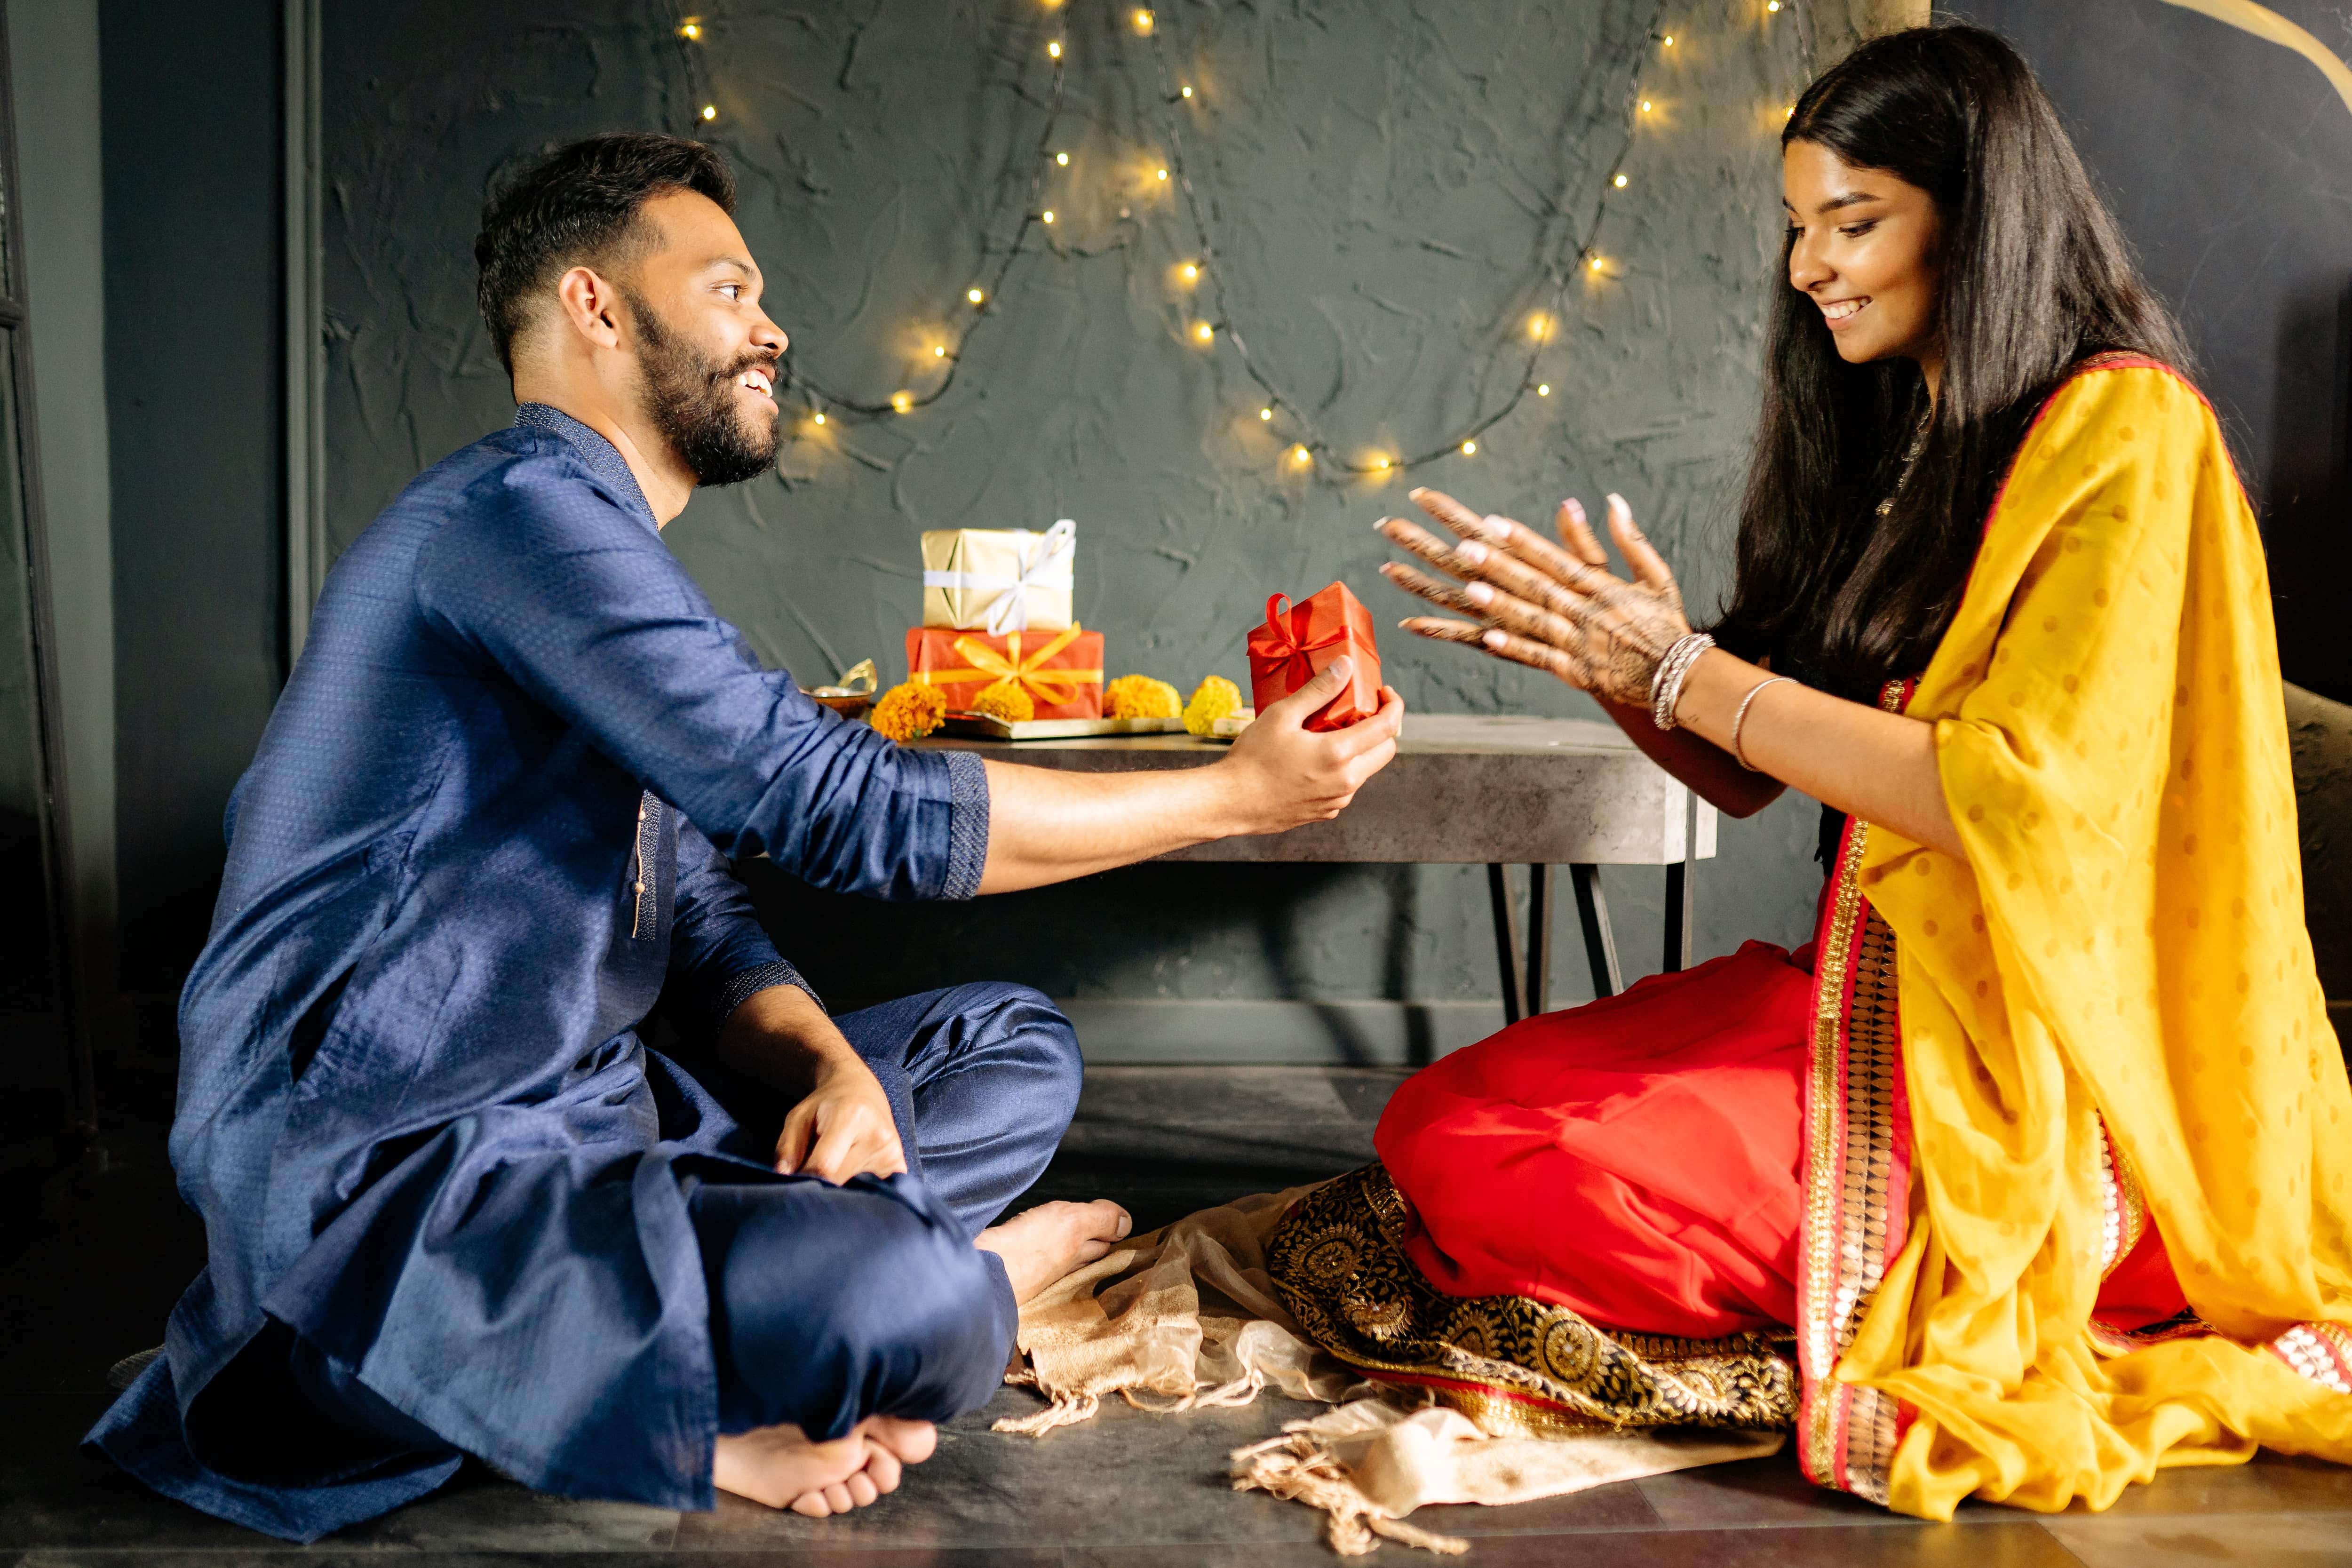 50+ Bhai Dooj Quotes, Messages, Greetings For Brorther & Sister | GiftaLove